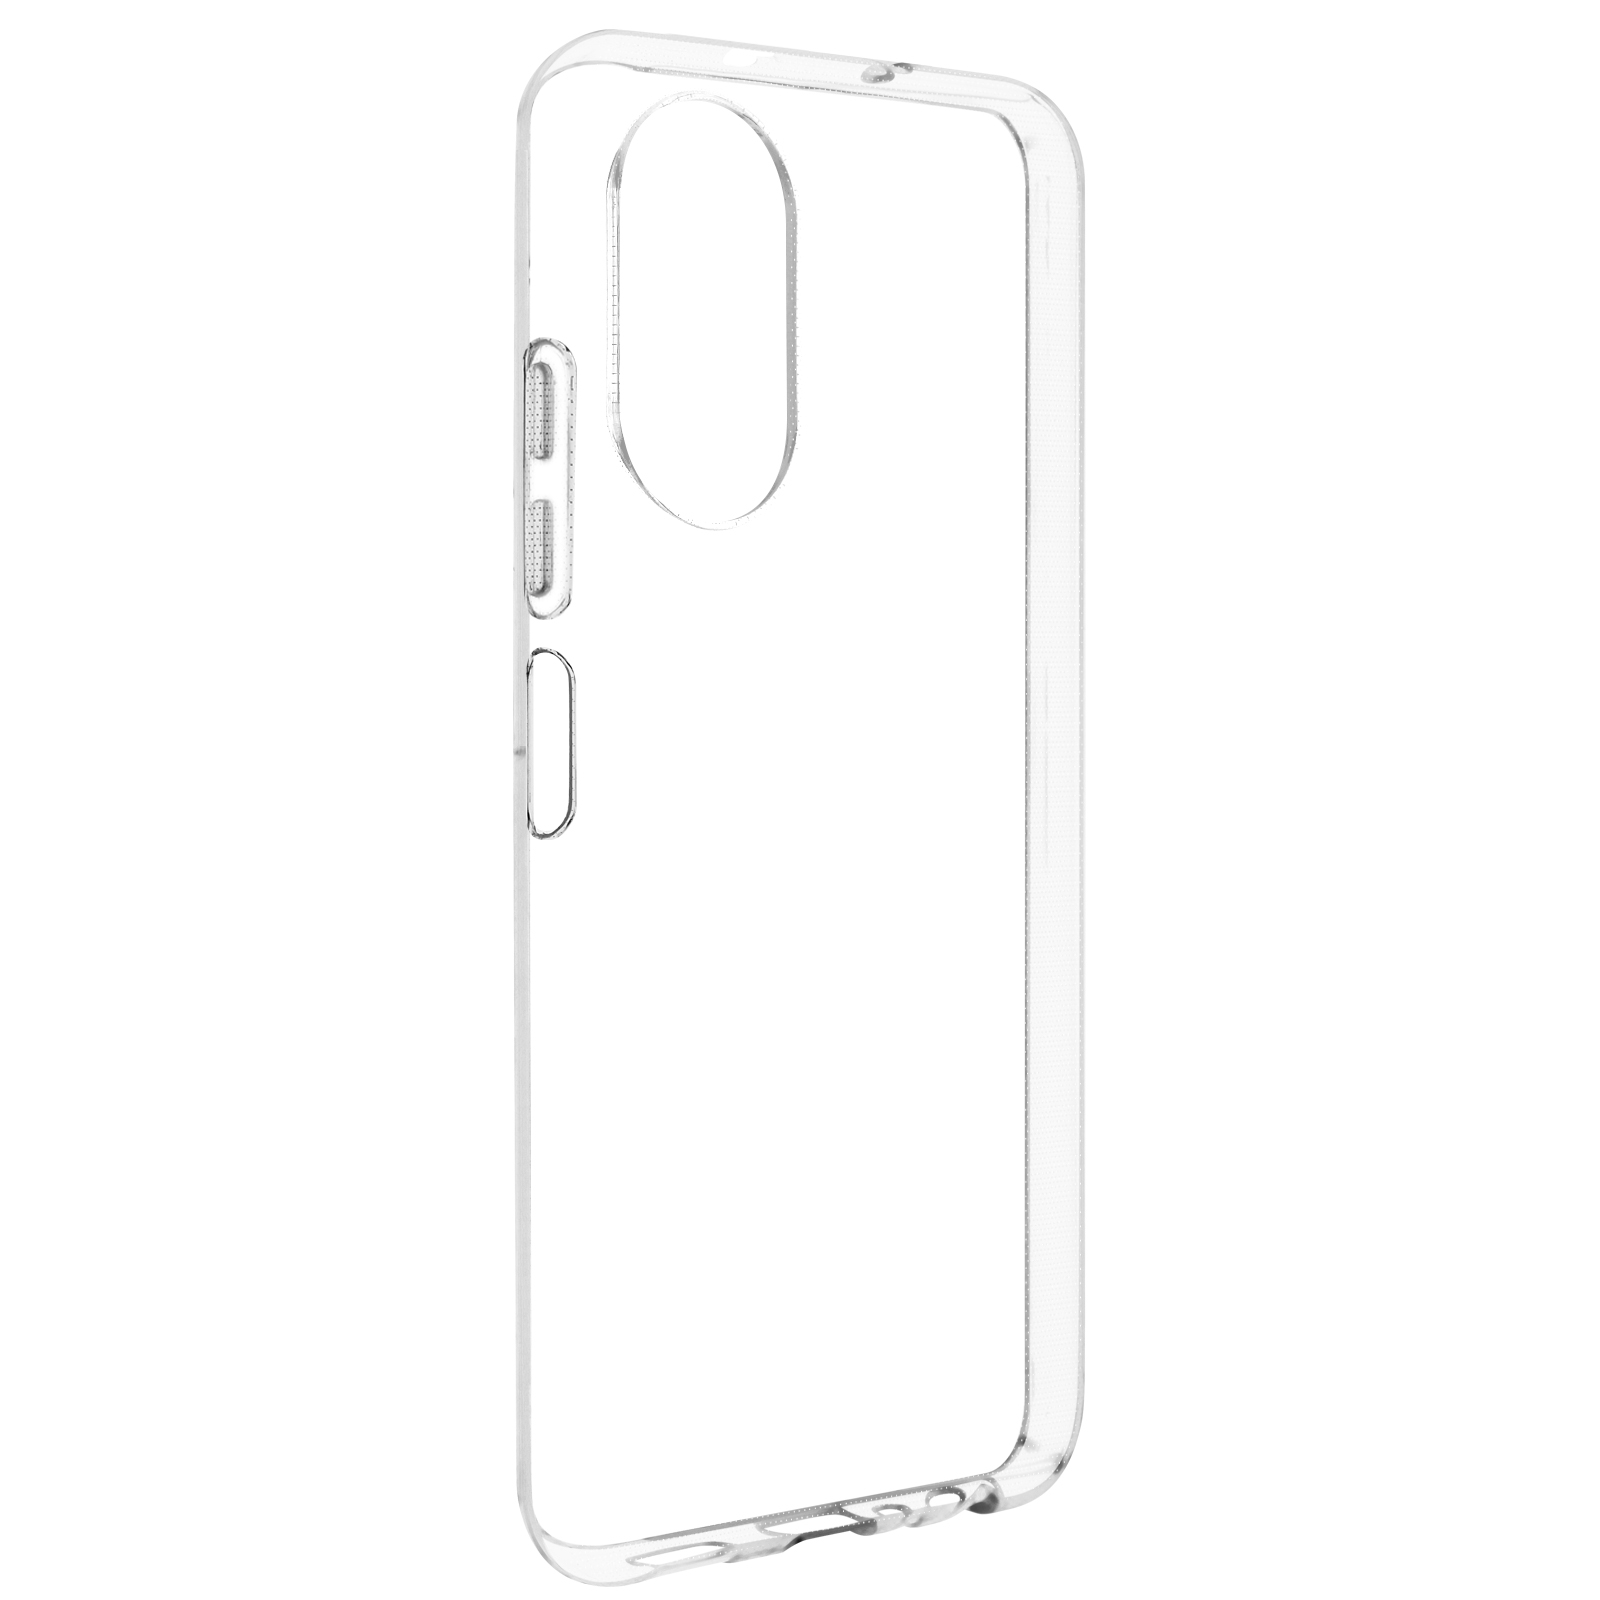 Series, Transparent Honor, X7, Schutzhülle MYWAY Honor weiche Backcover,